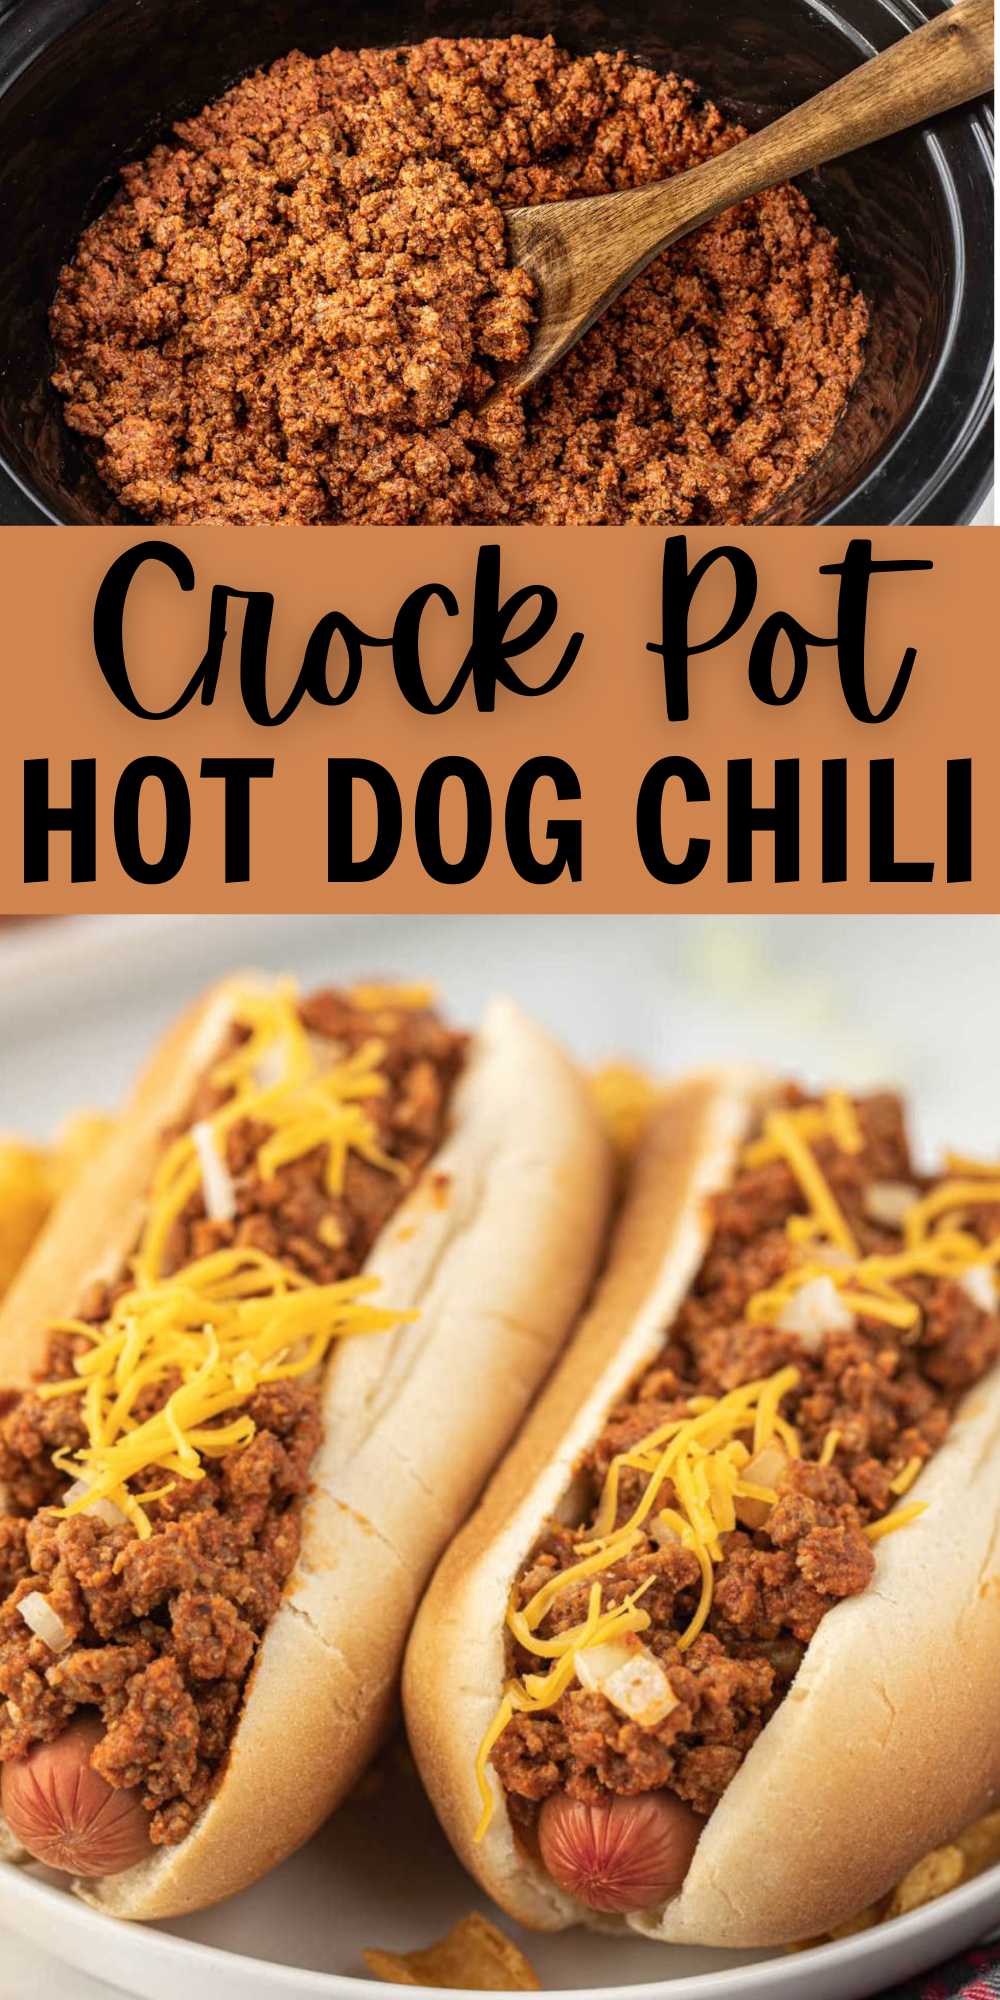 Crock Pot Hot Dog Chili is the perfect addition to your hot dog bar. This chili is full of flavor and easy to make with simple ingredients. Making Slow Cooker Hot Dog Chili keeps the chili warm and delicious. #eatingoadime #crockpothotdogchili #hotdogchili #hotdogbar #gameday 